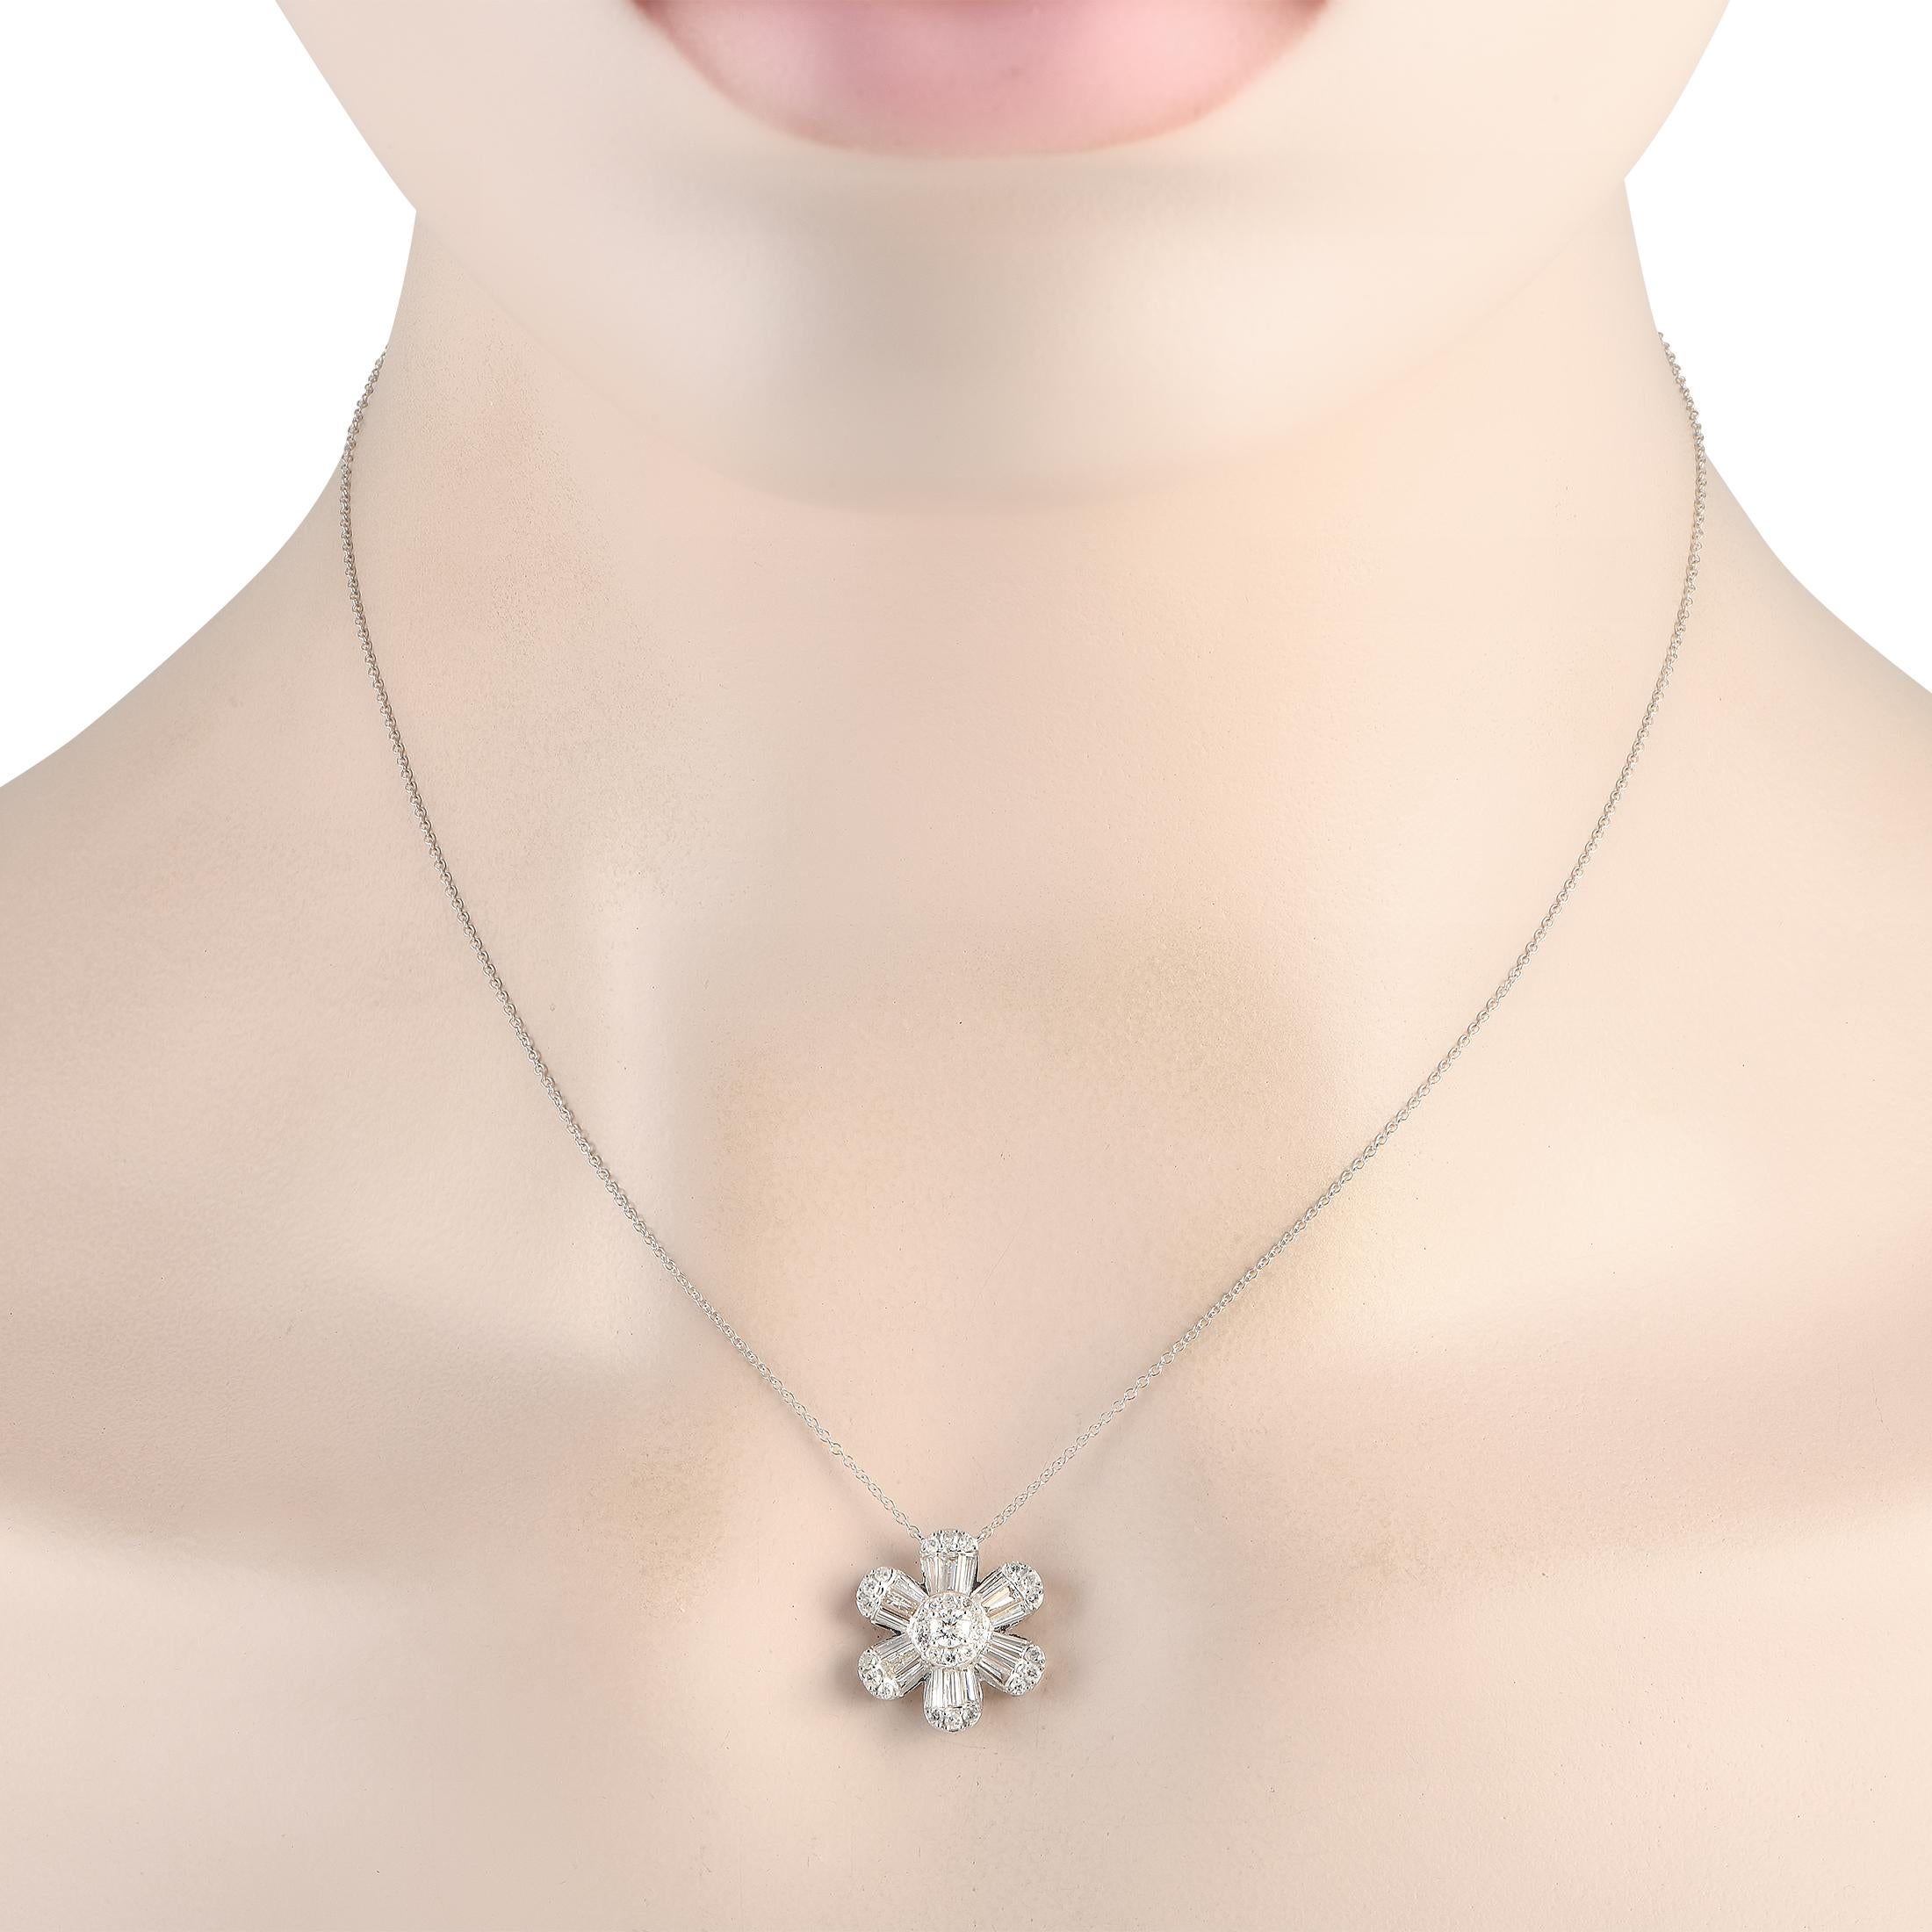 A stunning floral-shaped pendant measuring 0.65 round makes this necklace instantly captivating. Diamonds with a total weight of 1.20 carats also allow it to sparkle and shine every time it catches the light. Crafted from opulent 14K white gold, it